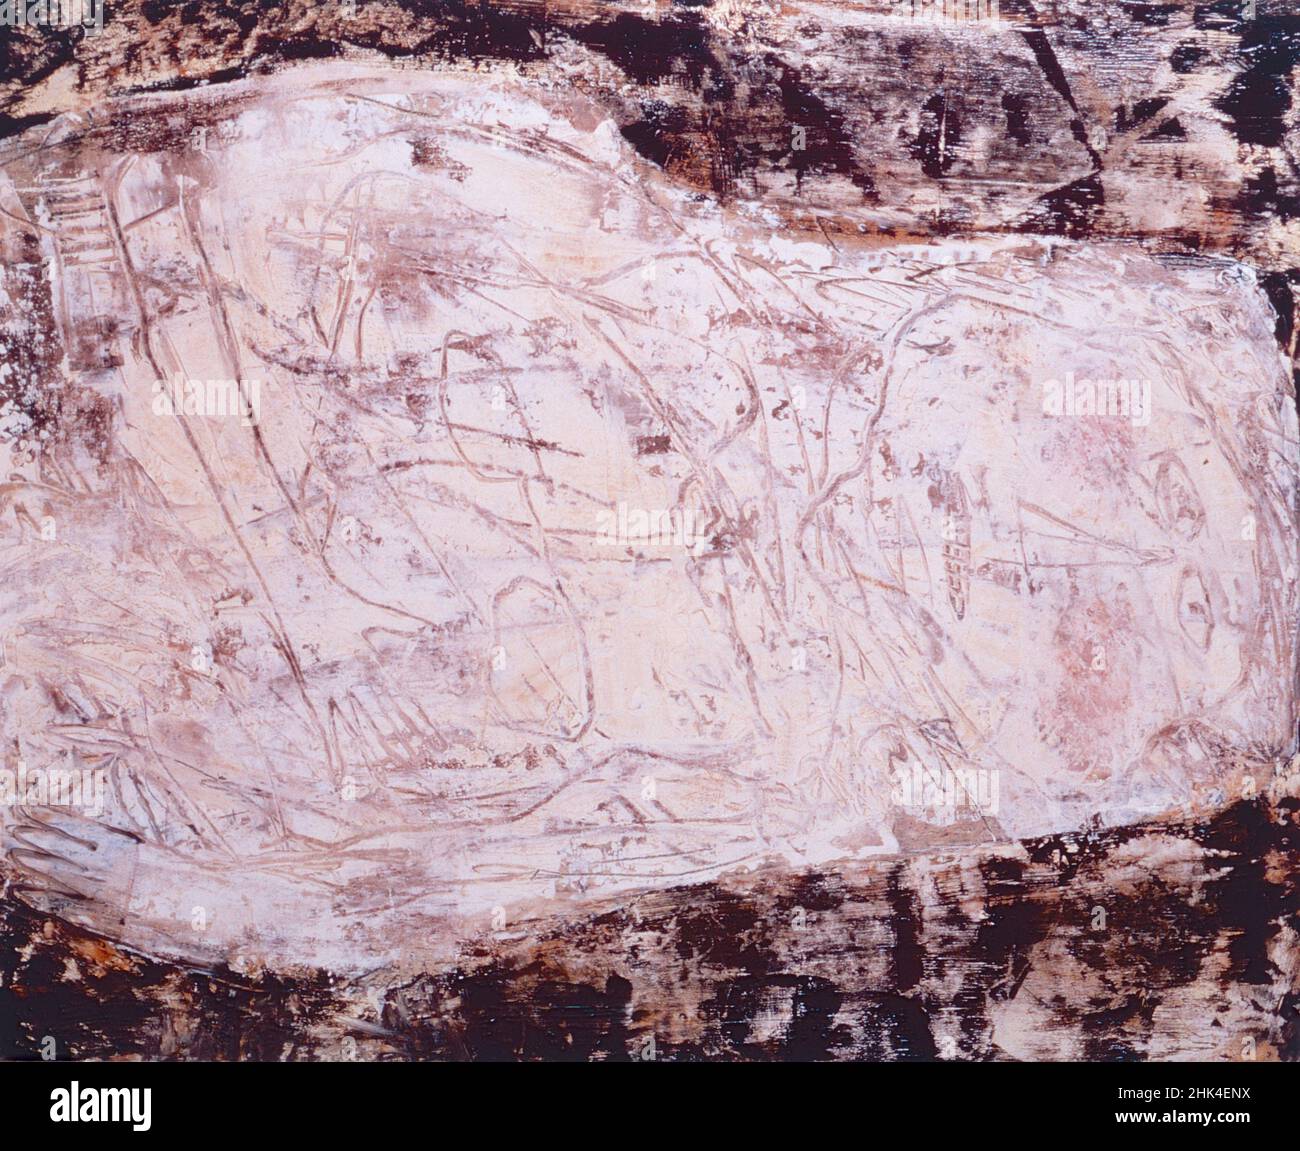 Artwork by French artist Jean Dubuffet, 1955 Stock Photo